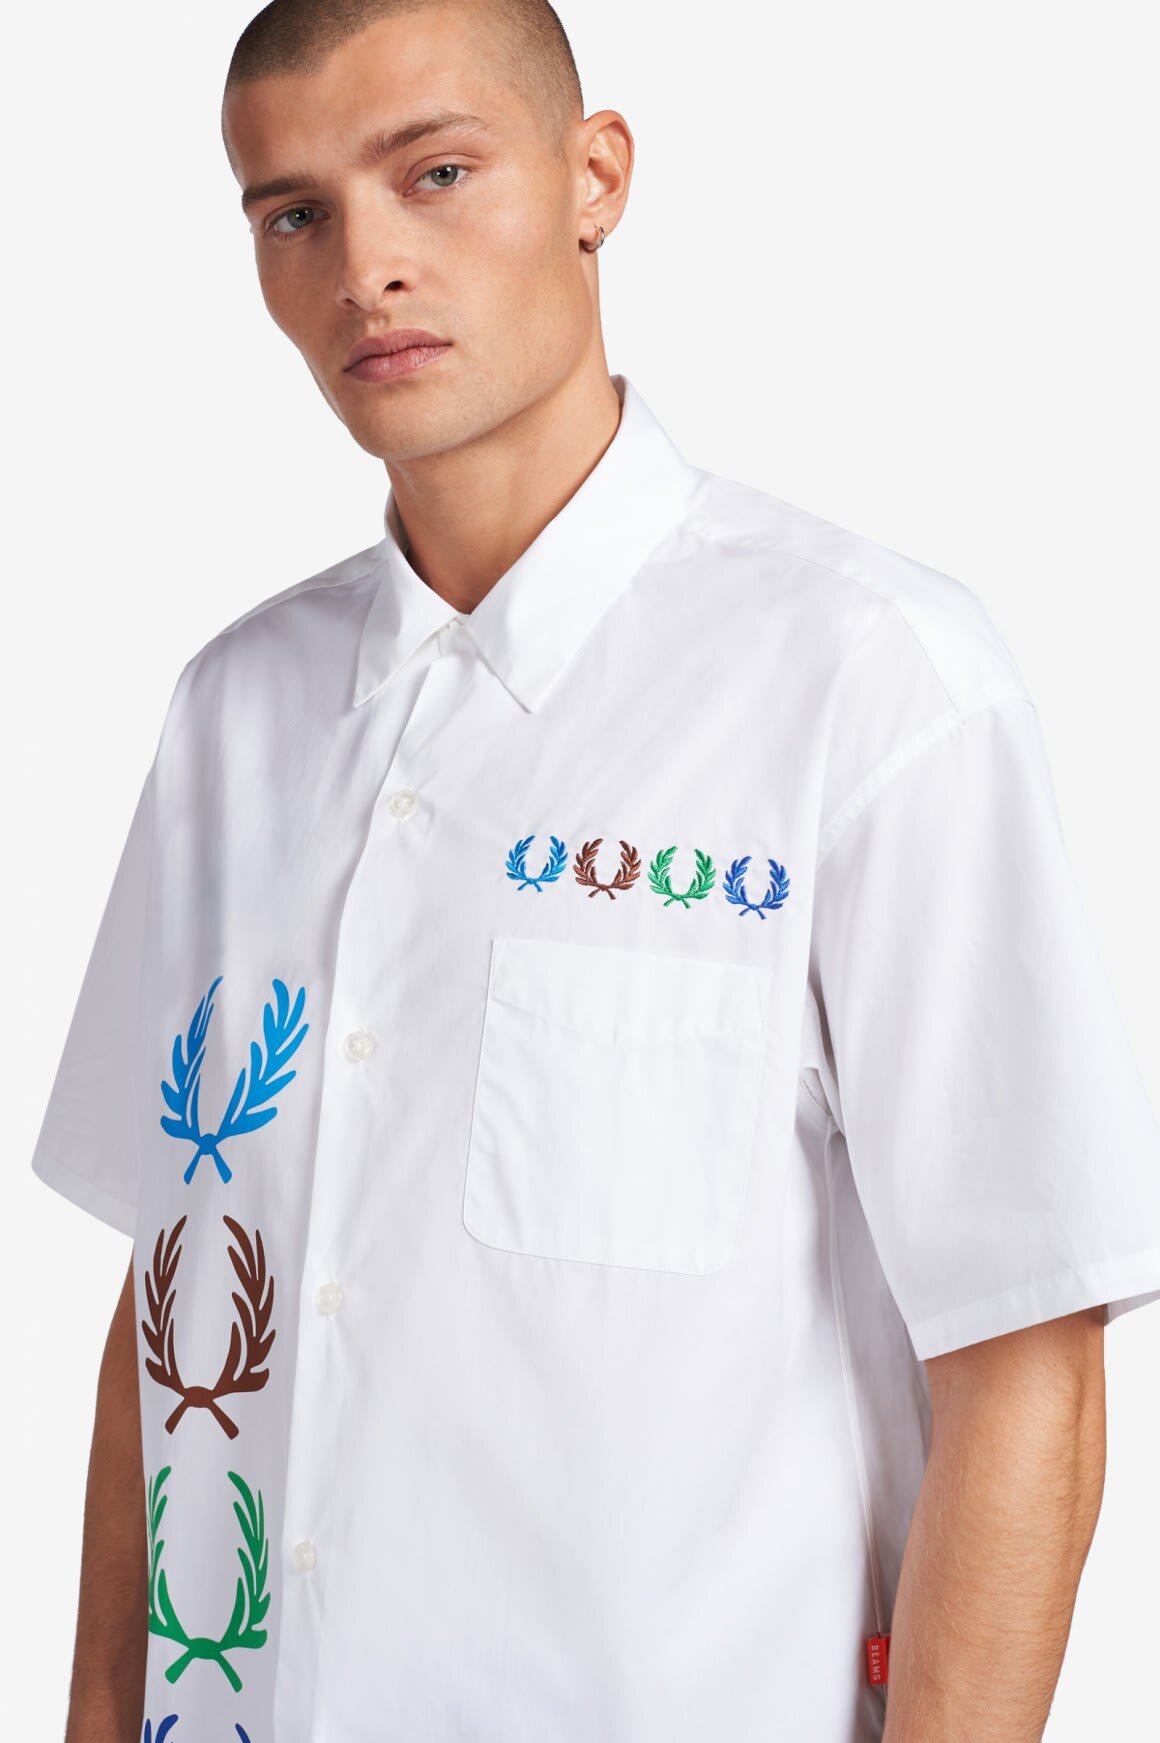 fred-perry3.jpg